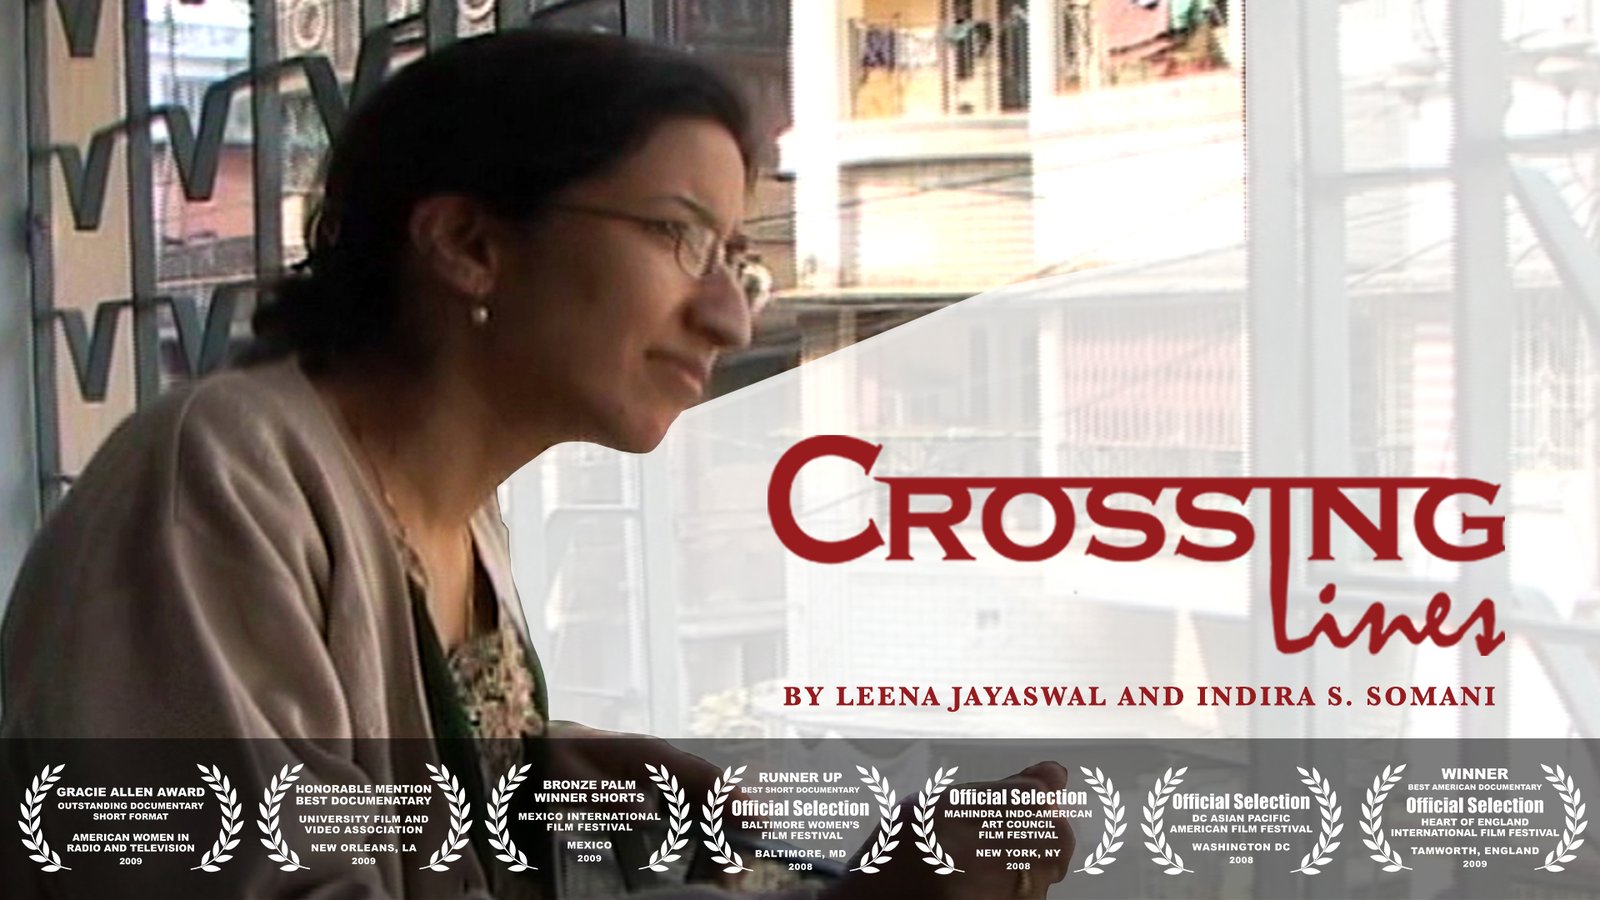 Crossing Lines - An Indian American Woman Celebrates Her Heritage